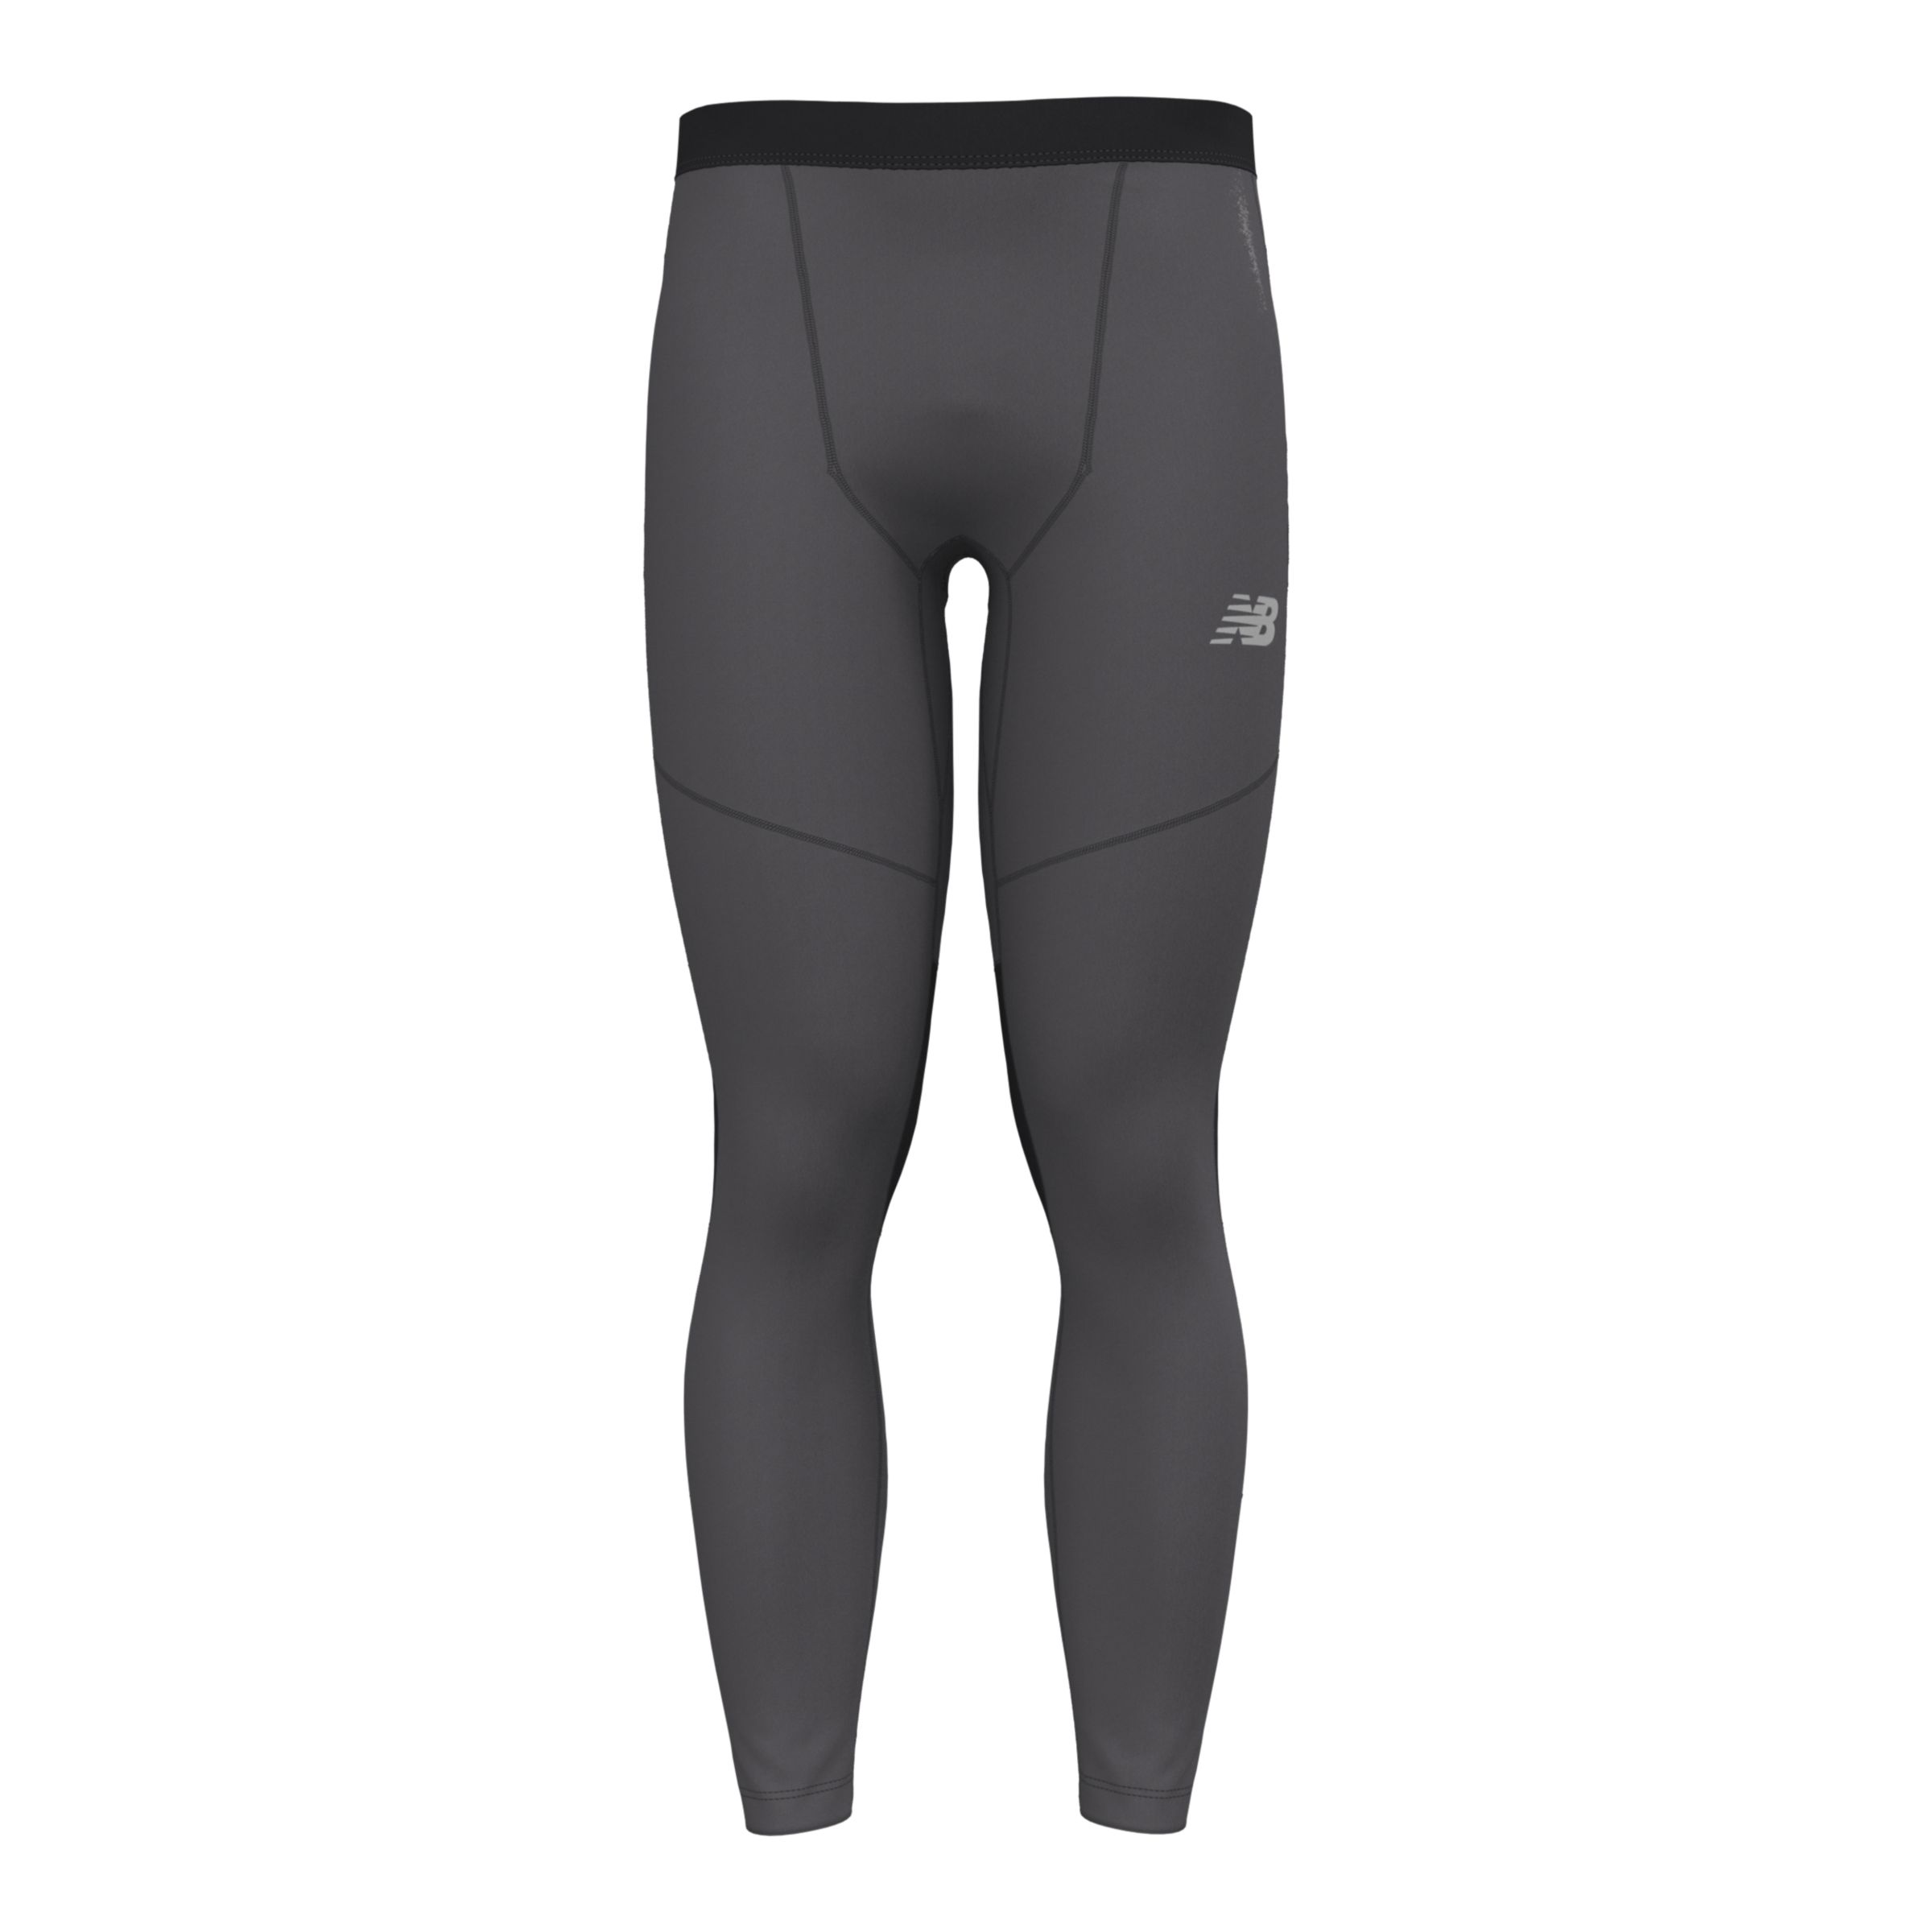 New Balance Achiever performance Leggings in black green and grey